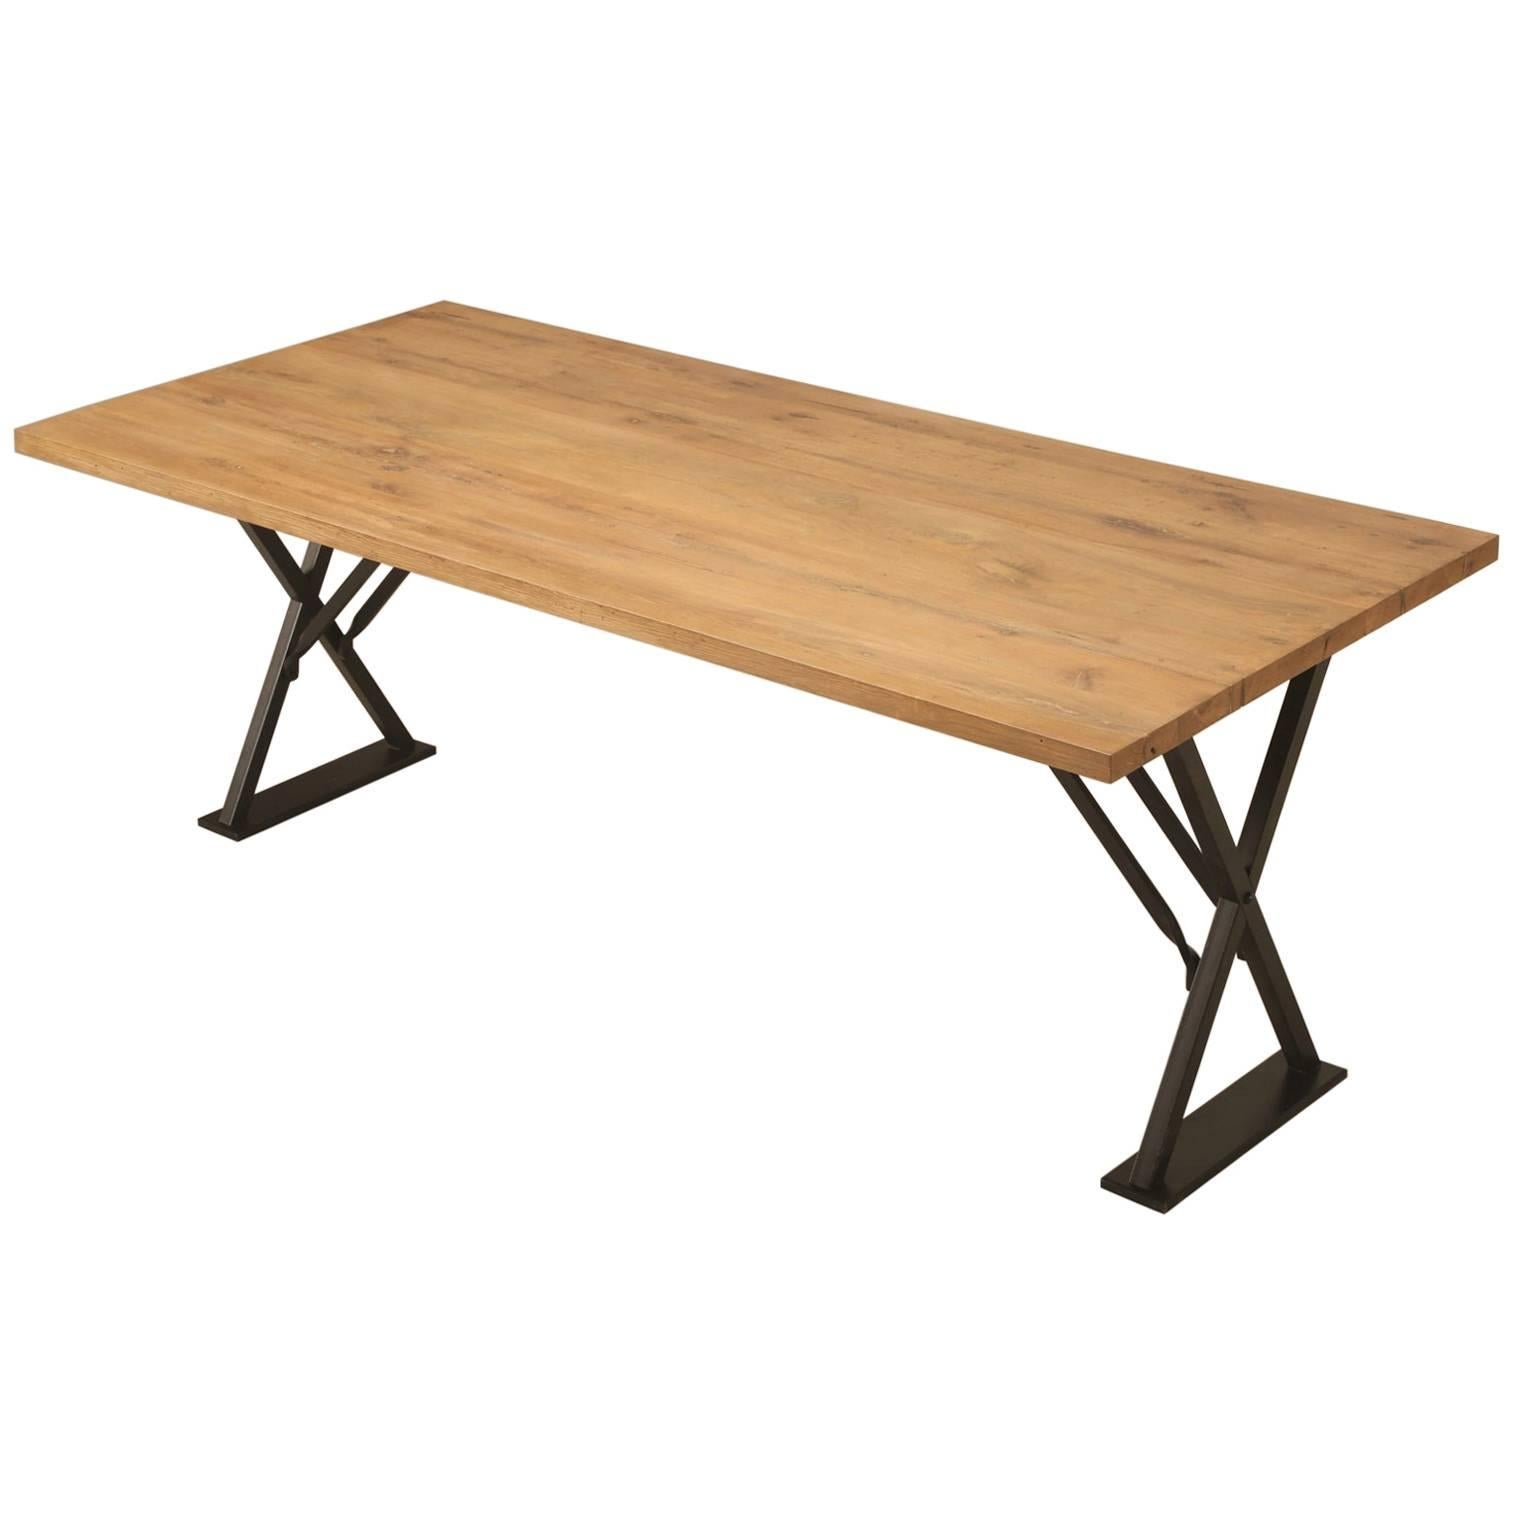 Industrial Inspired Kitchen Table from French White Oak and Steel by Old Plank For Sale